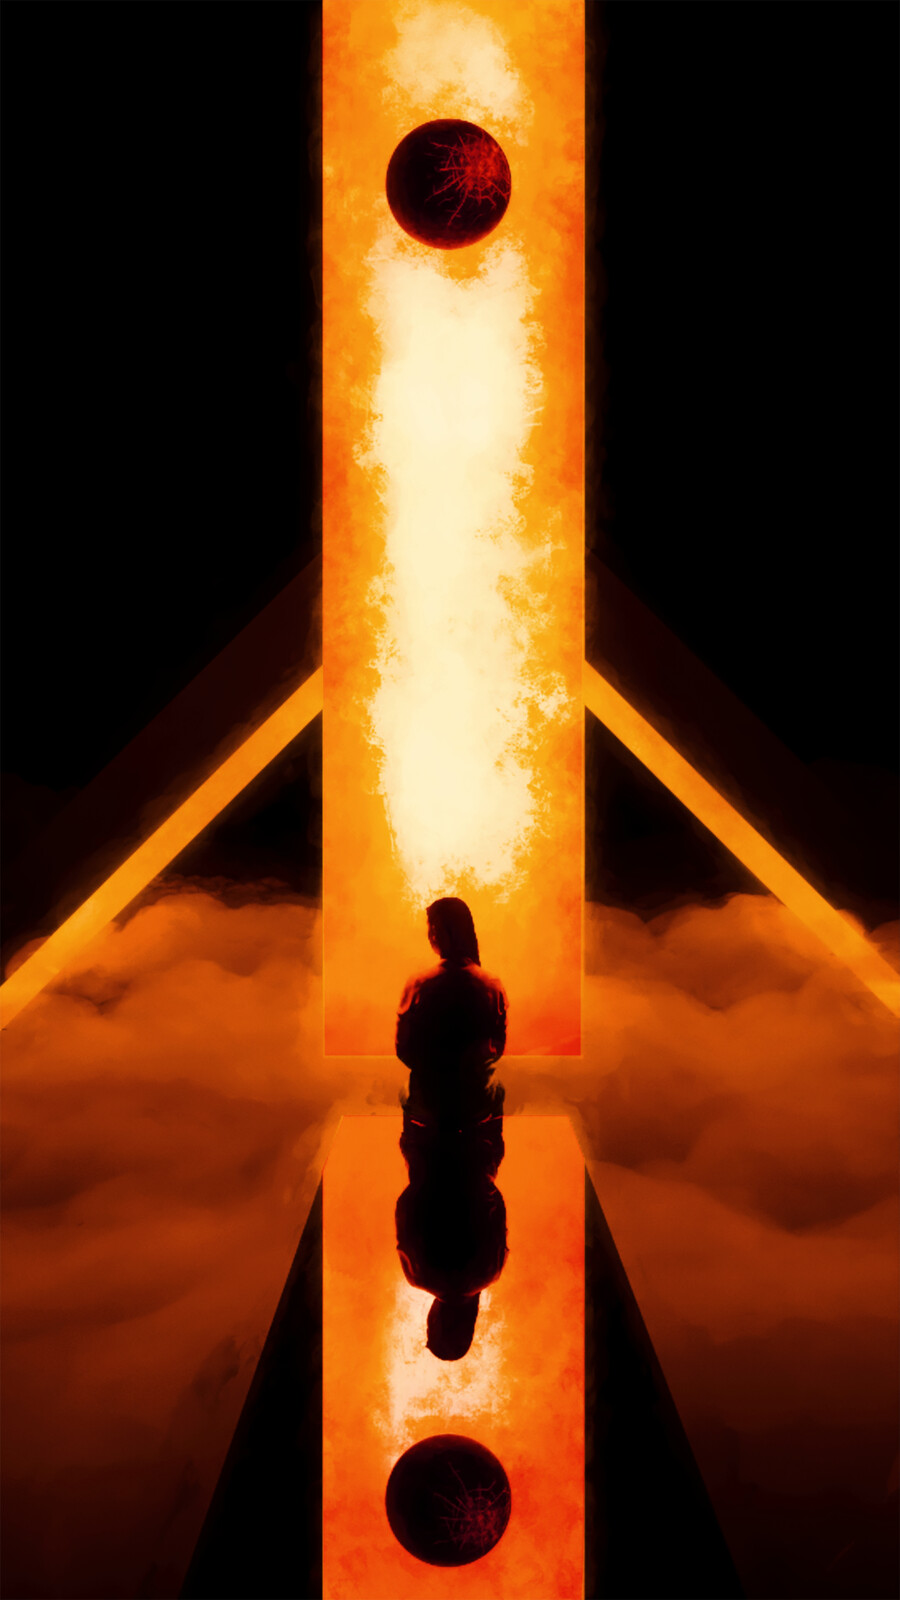 Title: Neglect 
Description: A woman sits on a pier above the clouds looking up at a burning planet